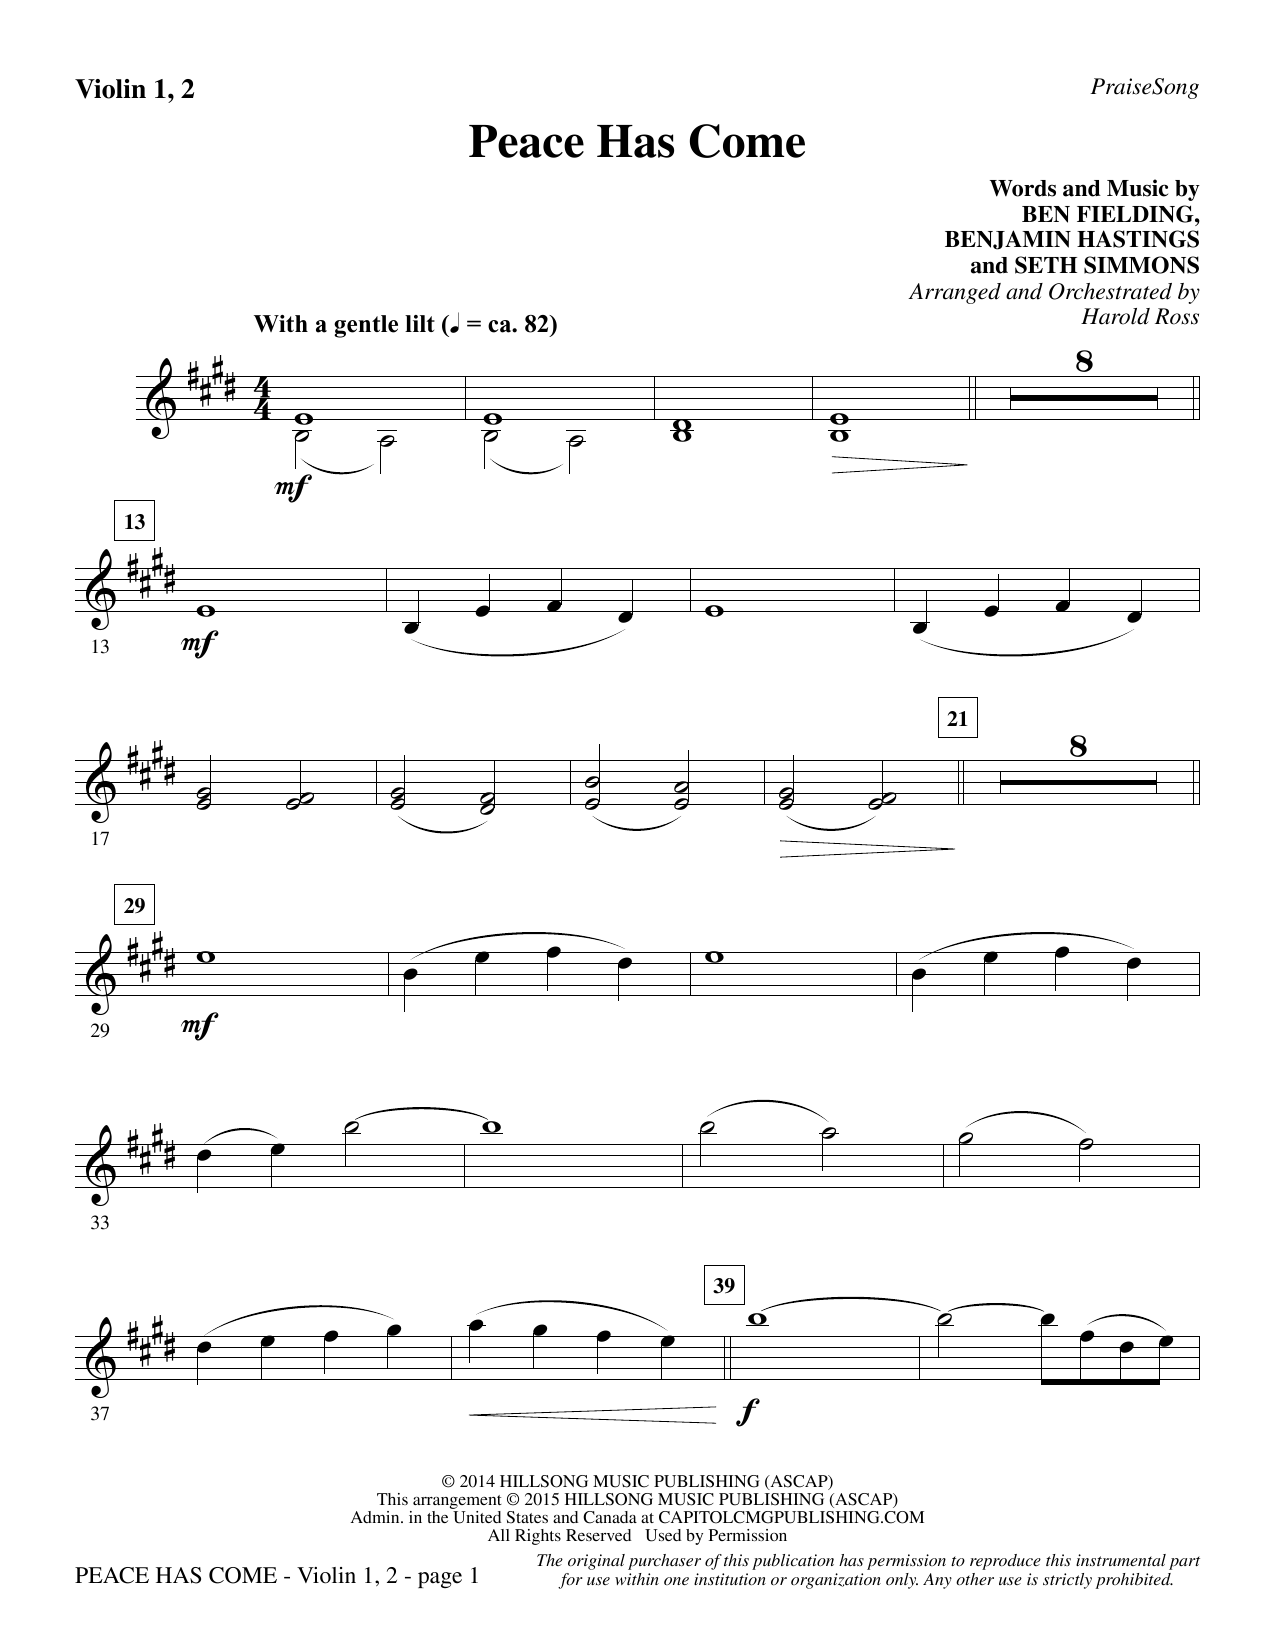 Harold Ross Peace Has Come - Violin 1, 2 sheet music notes and chords. Download Printable PDF.